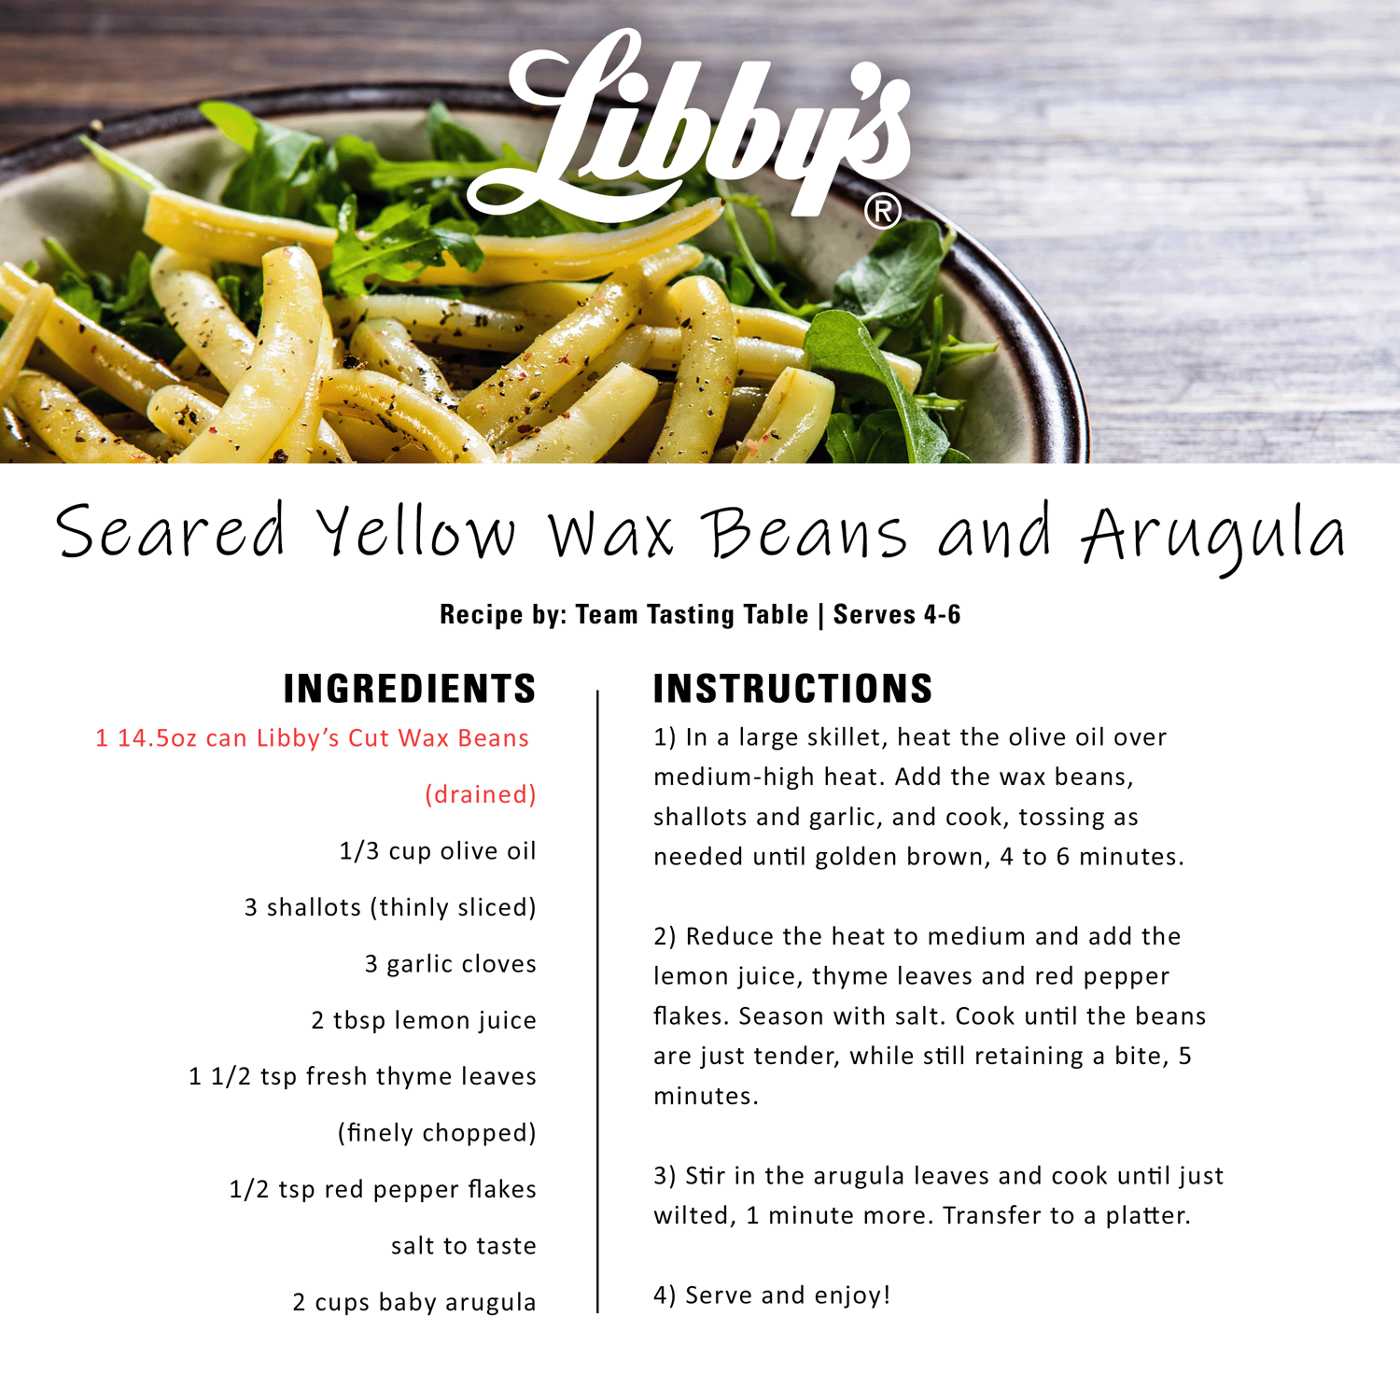 Libby's Cut Wax Beans; image 5 of 5